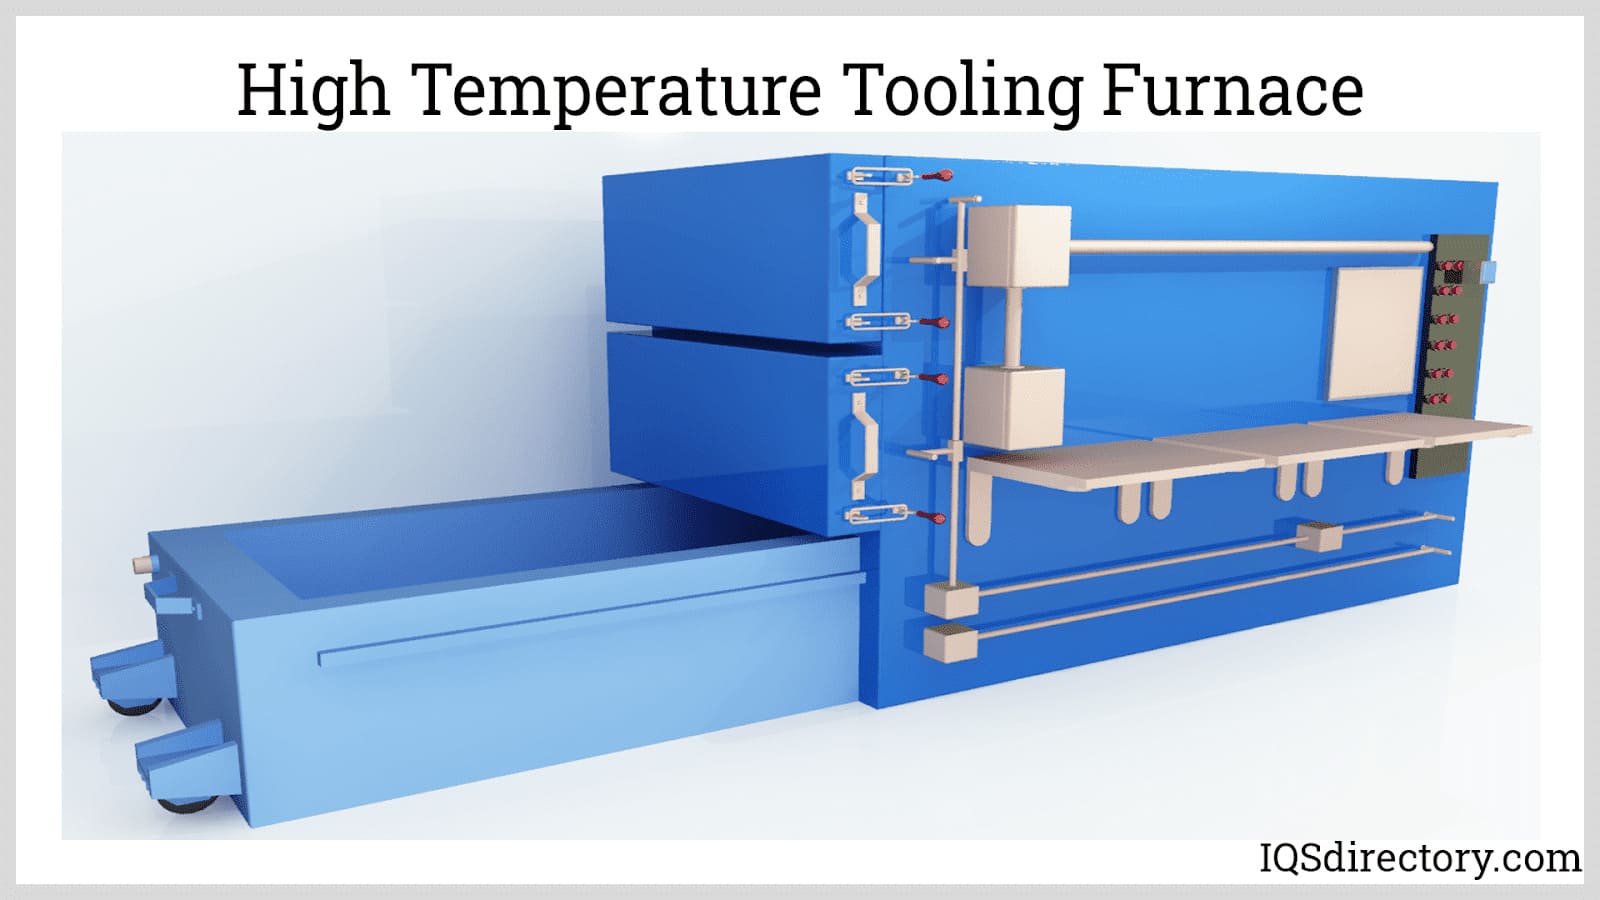 https://www.iqsdirectory.com/articles/industrial-oven/high-temperature-tooling-furnace.jpg